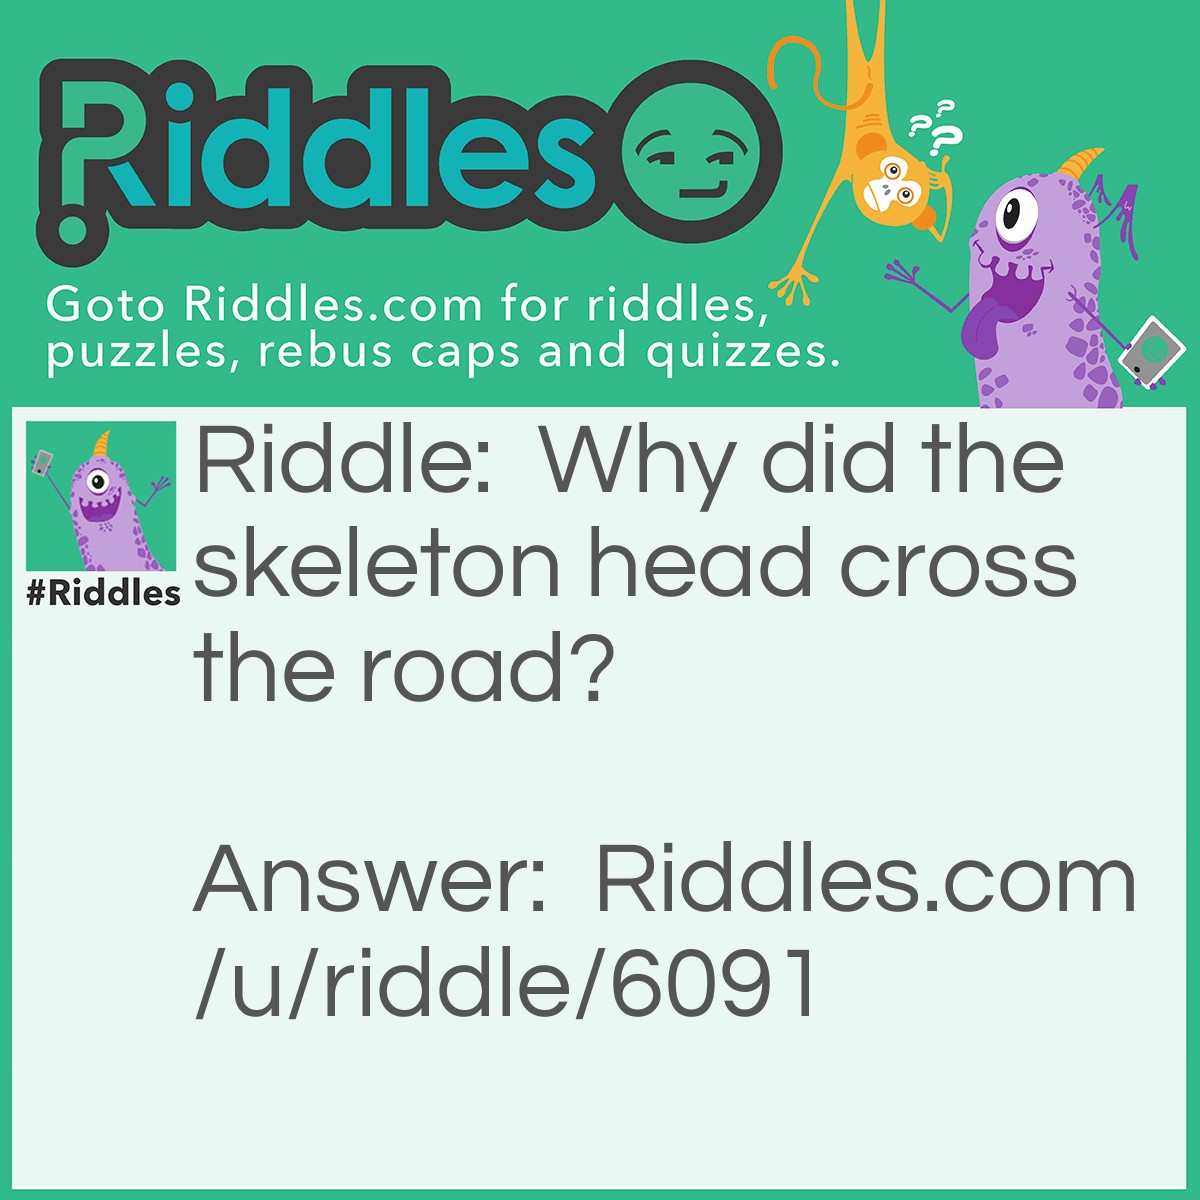 Riddle: Why did the skeleton head cross the road? Answer: To get to the other spine.